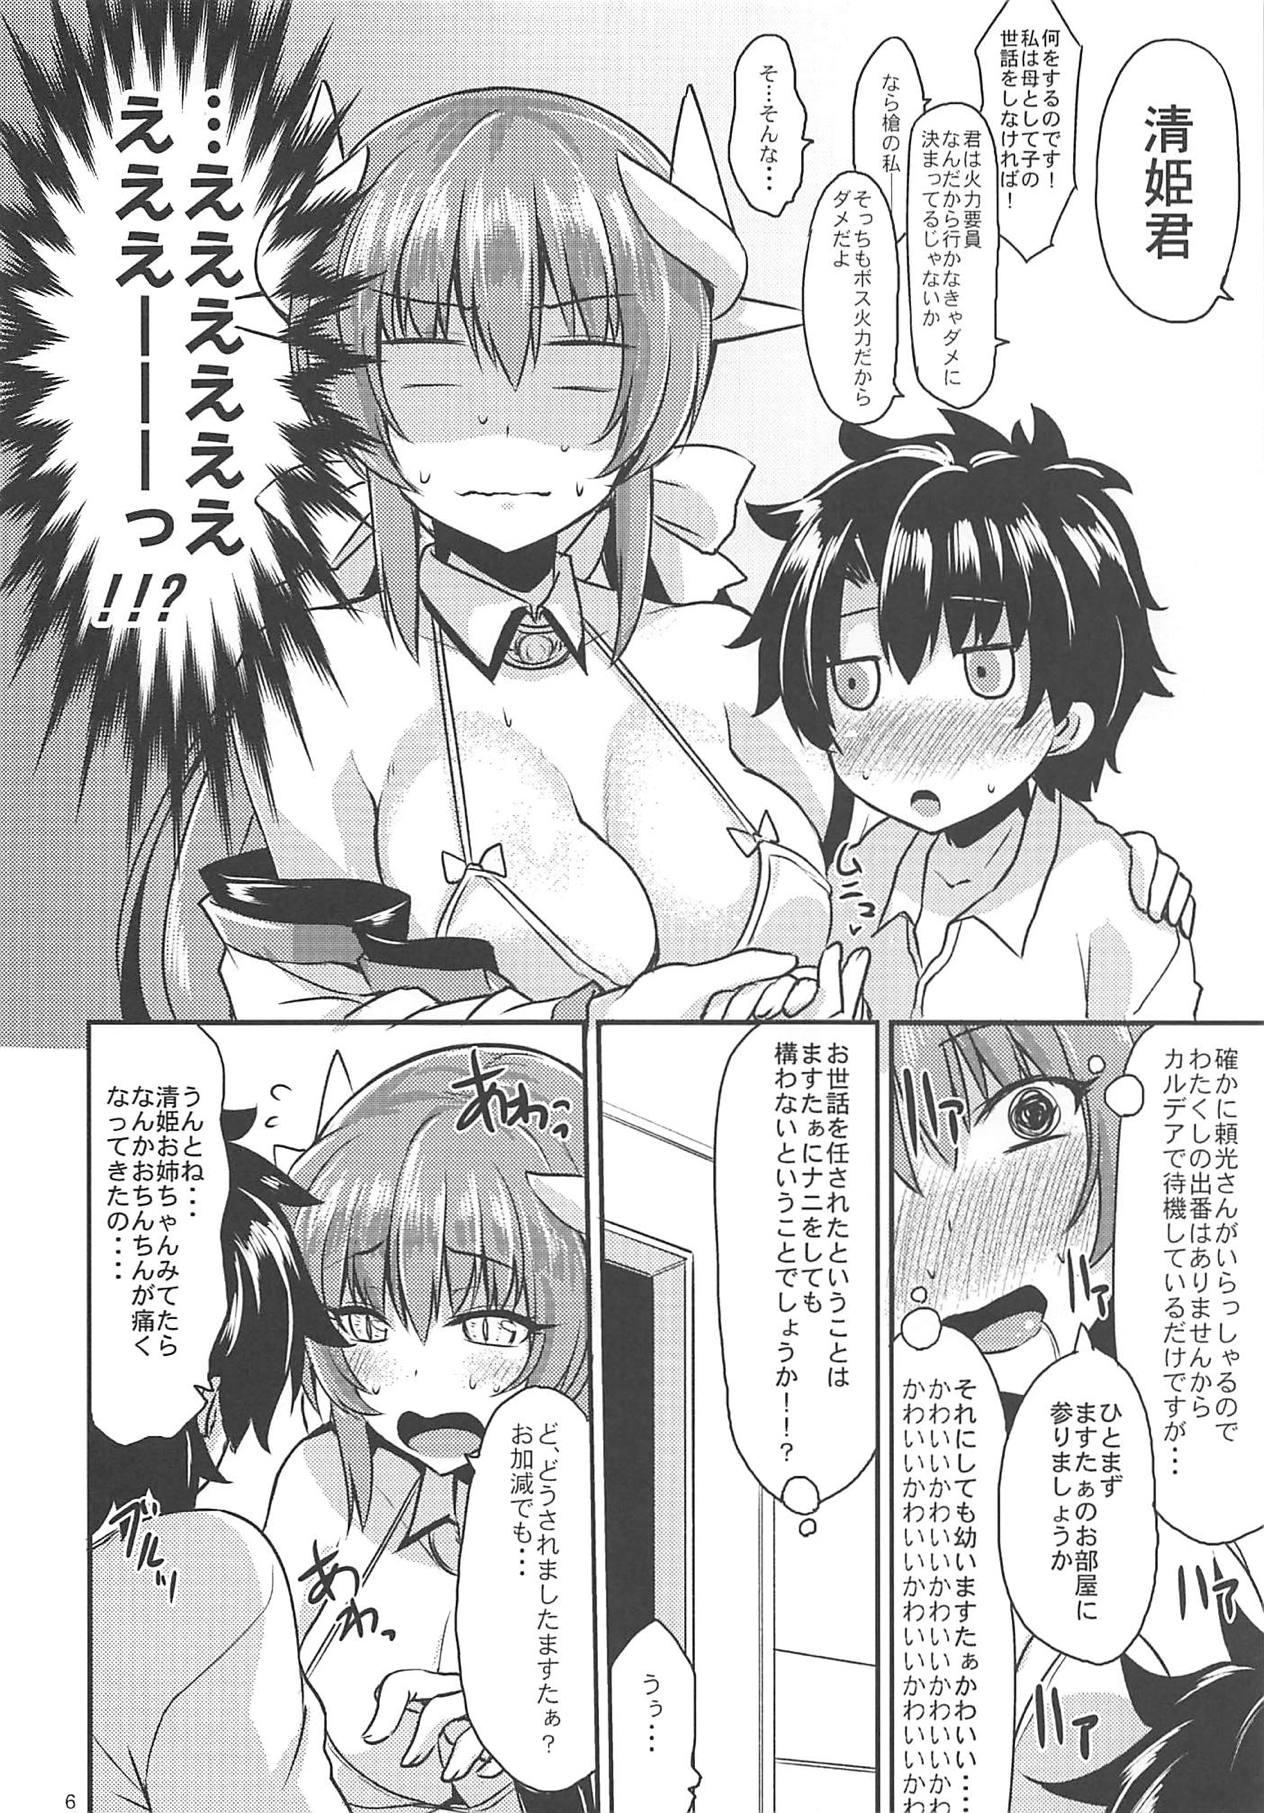 Stripping Anehime Hahahime Hebihime - Fate grand order Rico - Page 5